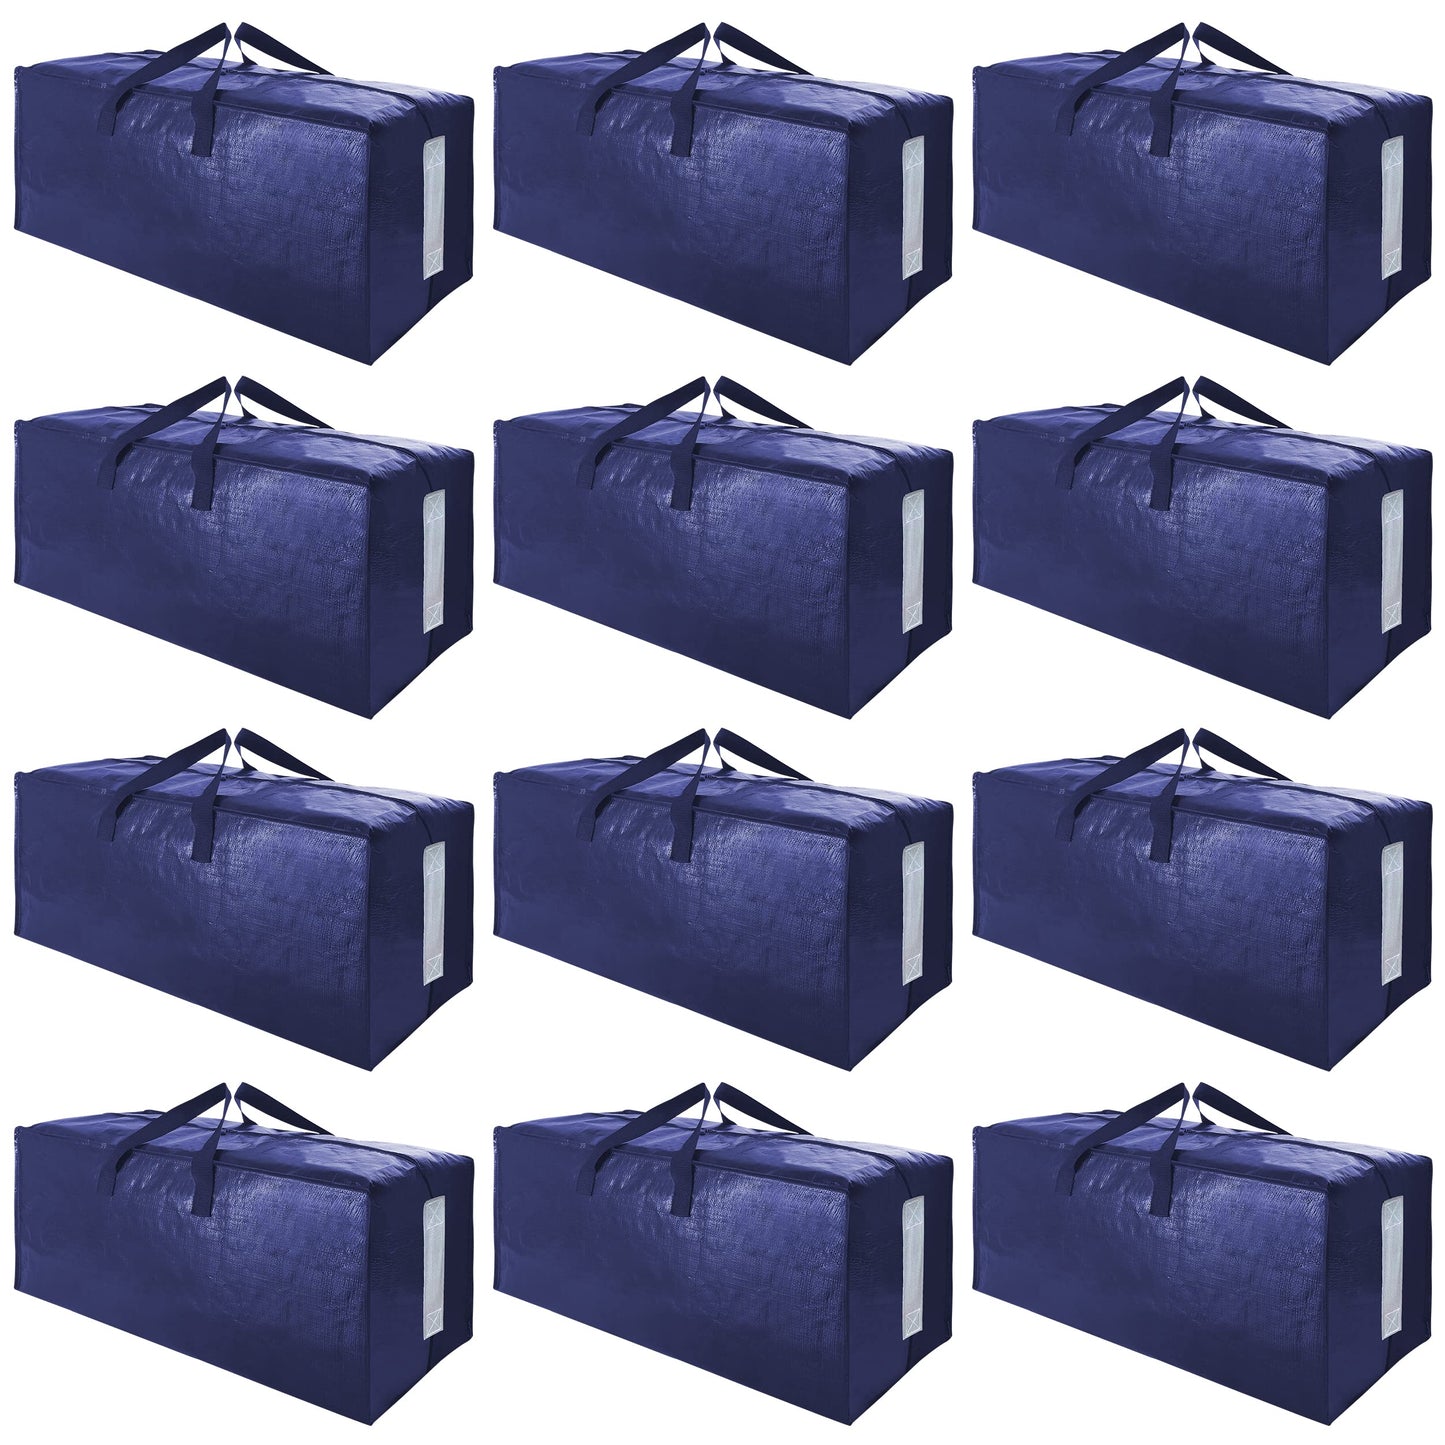 12 Pack Extra Large Moving Bags with Strong Zippers & Carrying Handles, Heavy Duty Storage Tote for Space Saving Moving Storage, Fold Flat, Alternative to Moving Box (Navy Blue)